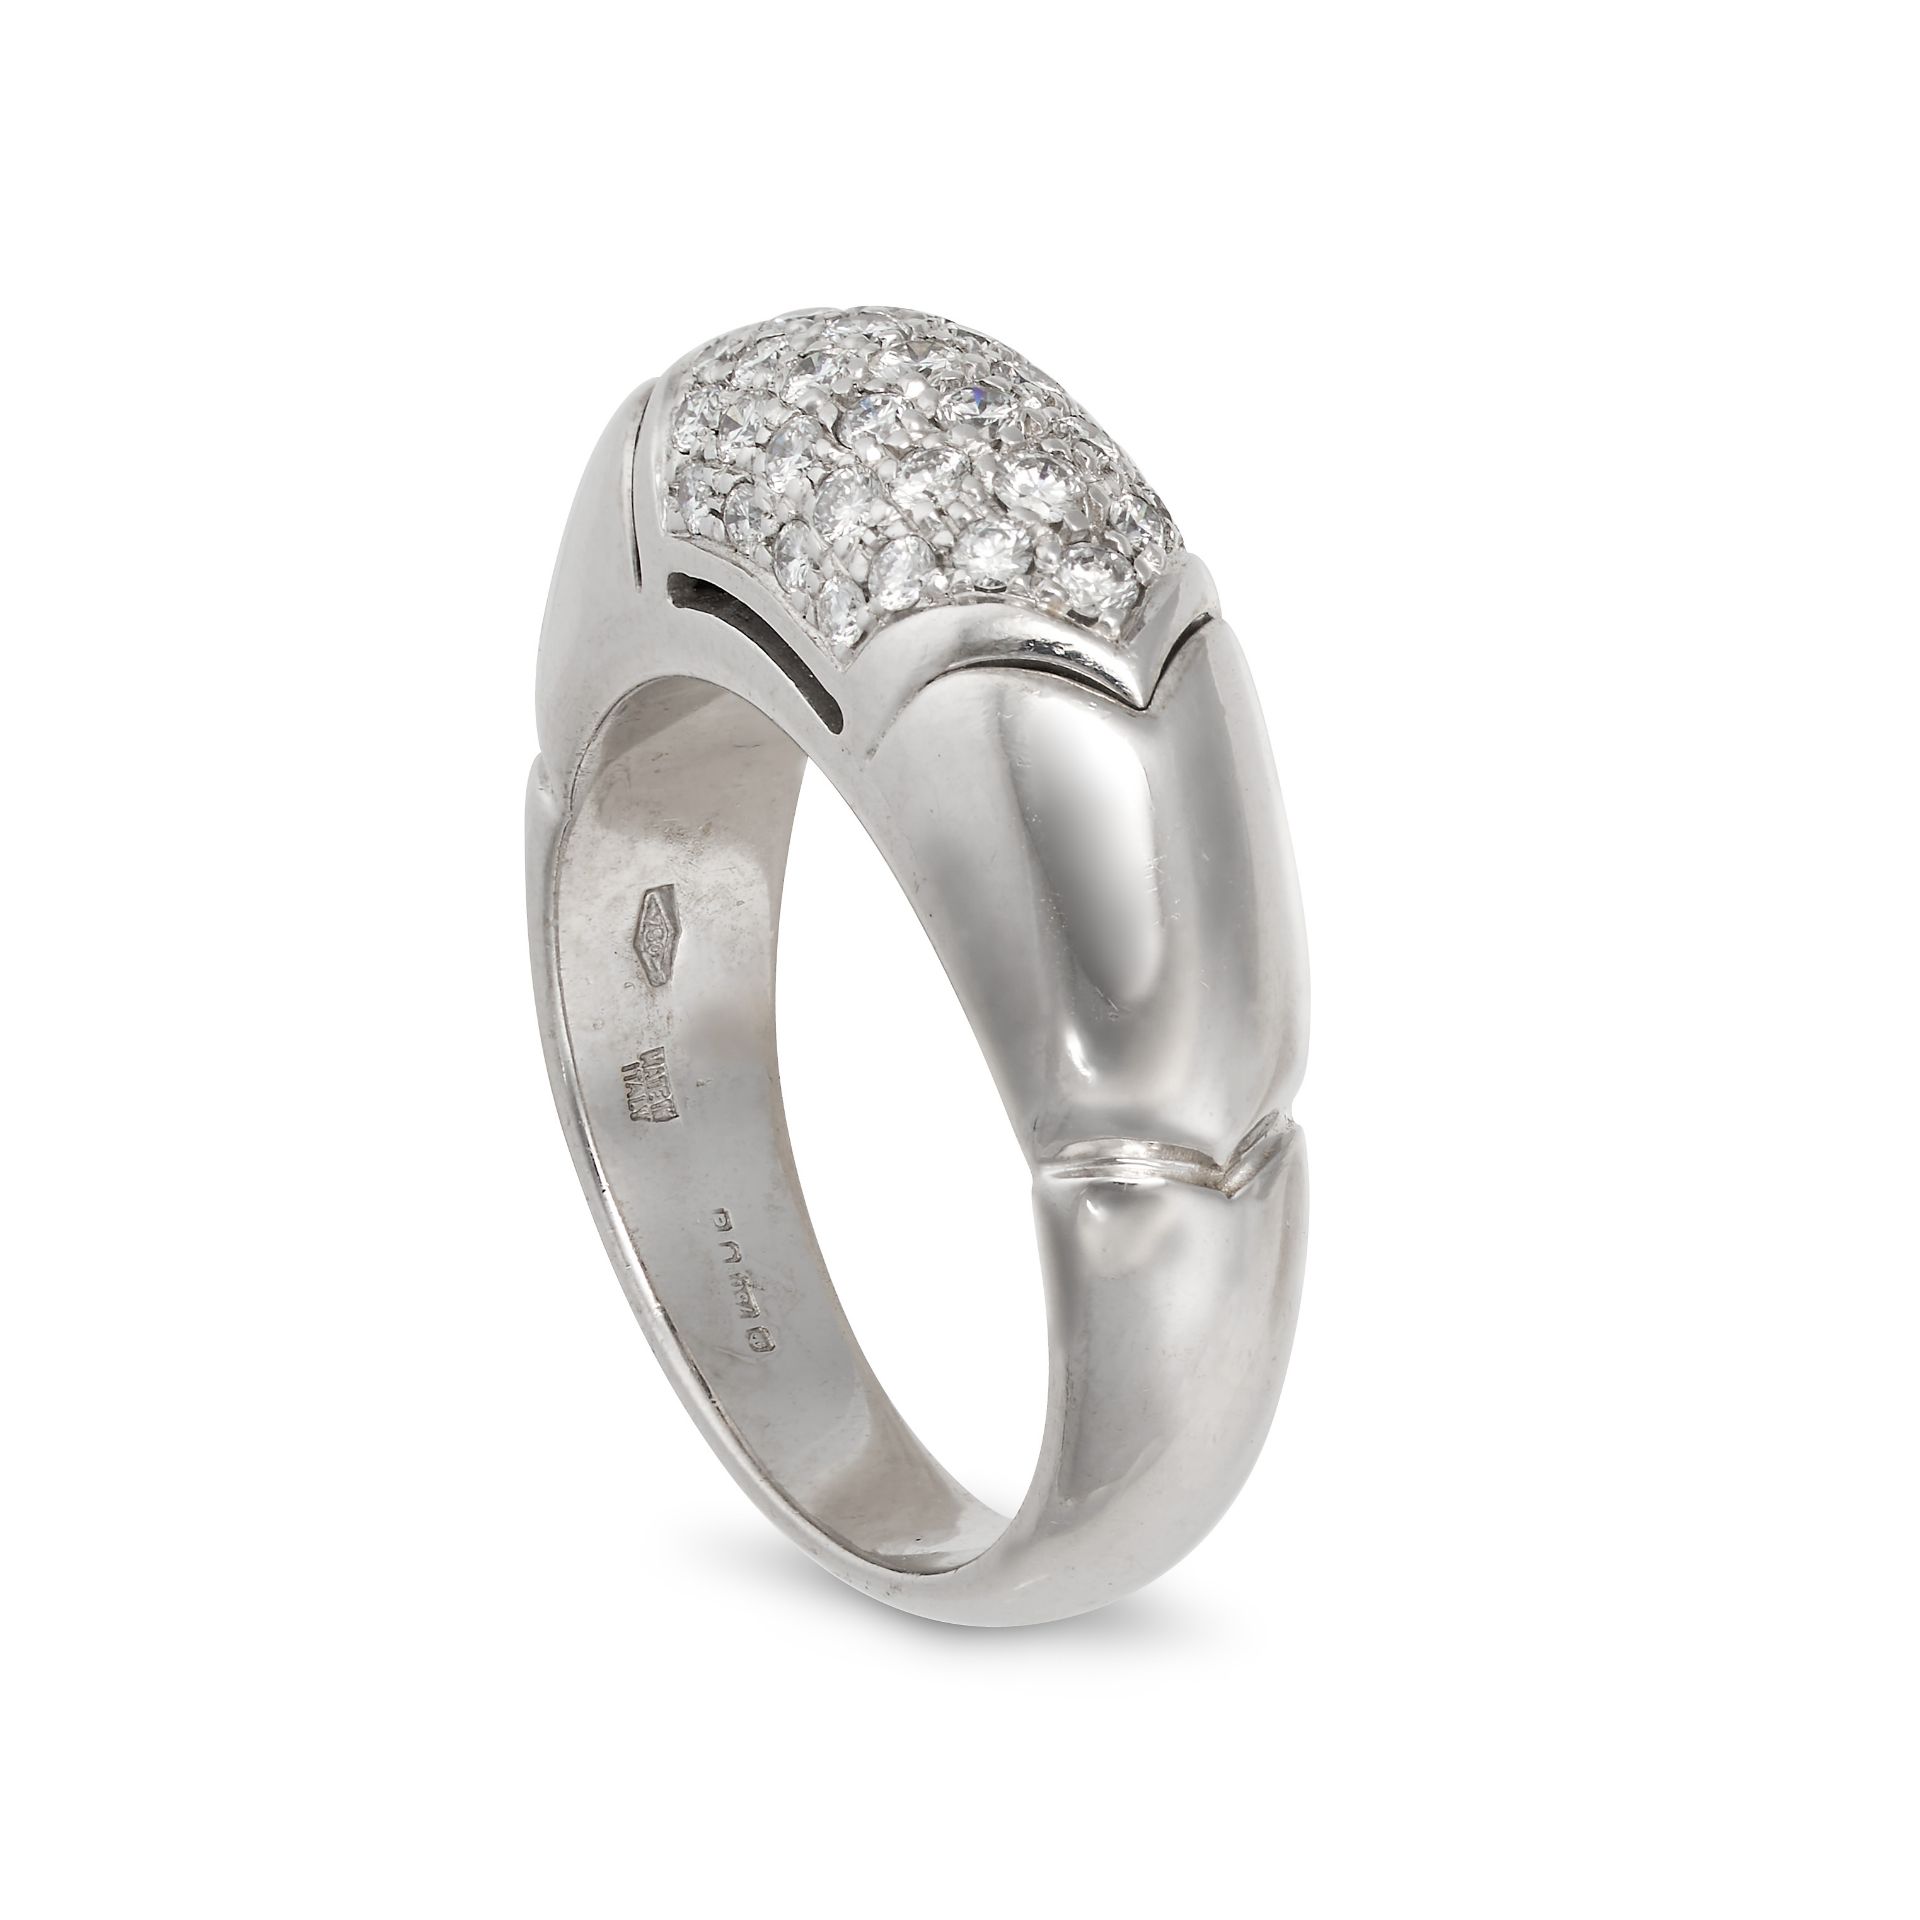 BULGARI, A DIAMOND DRESS RING in 18ct white gold, pave set with round brilliant cut diamonds, sig... - Image 2 of 2